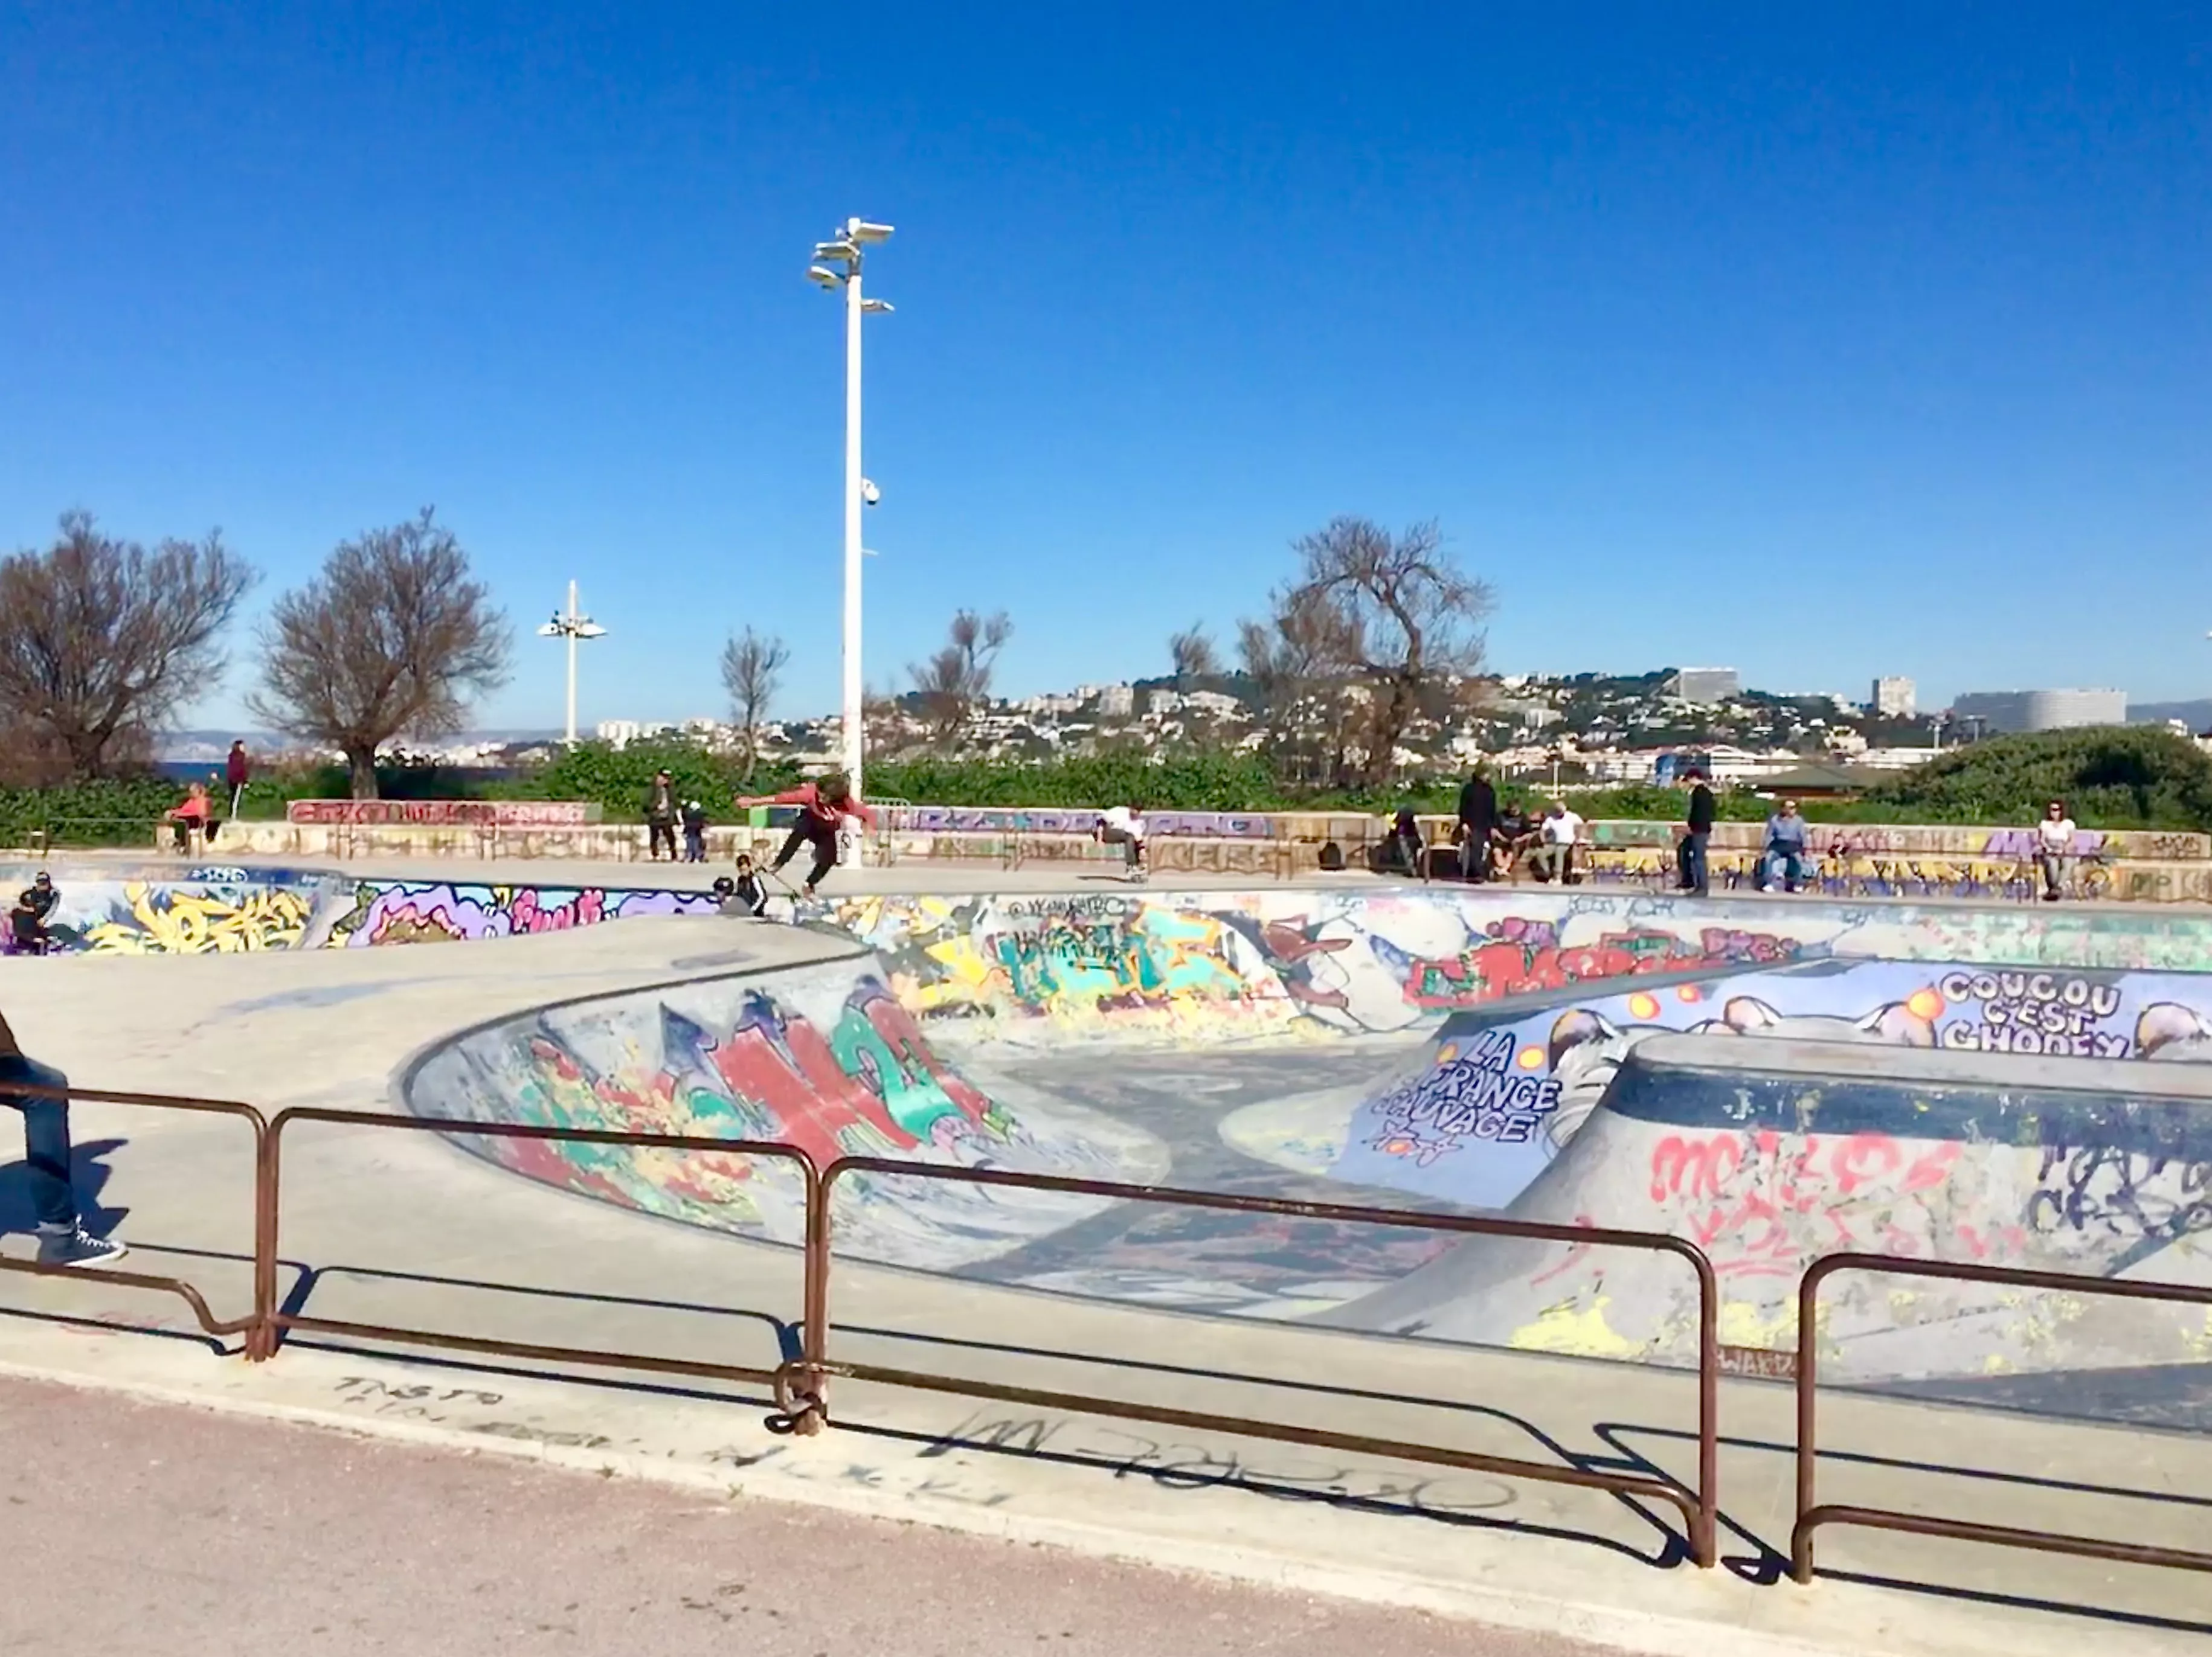 Bowl of Marseille in France, Europe | Skateboarding - Rated 4.4